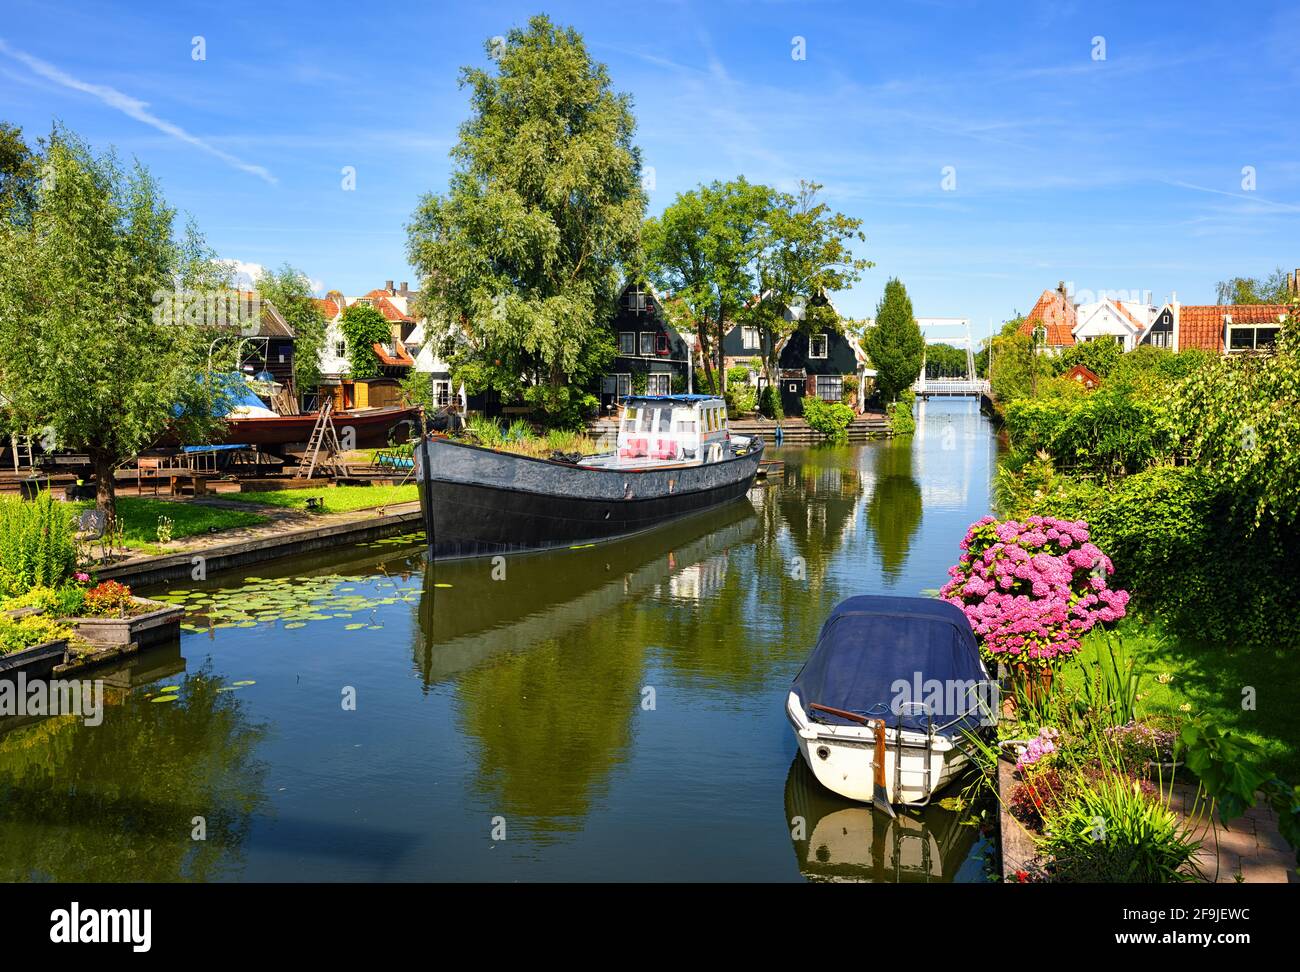 Typical dutch landscape by Edam town, Northern Holland, Netherlands Stock Photo